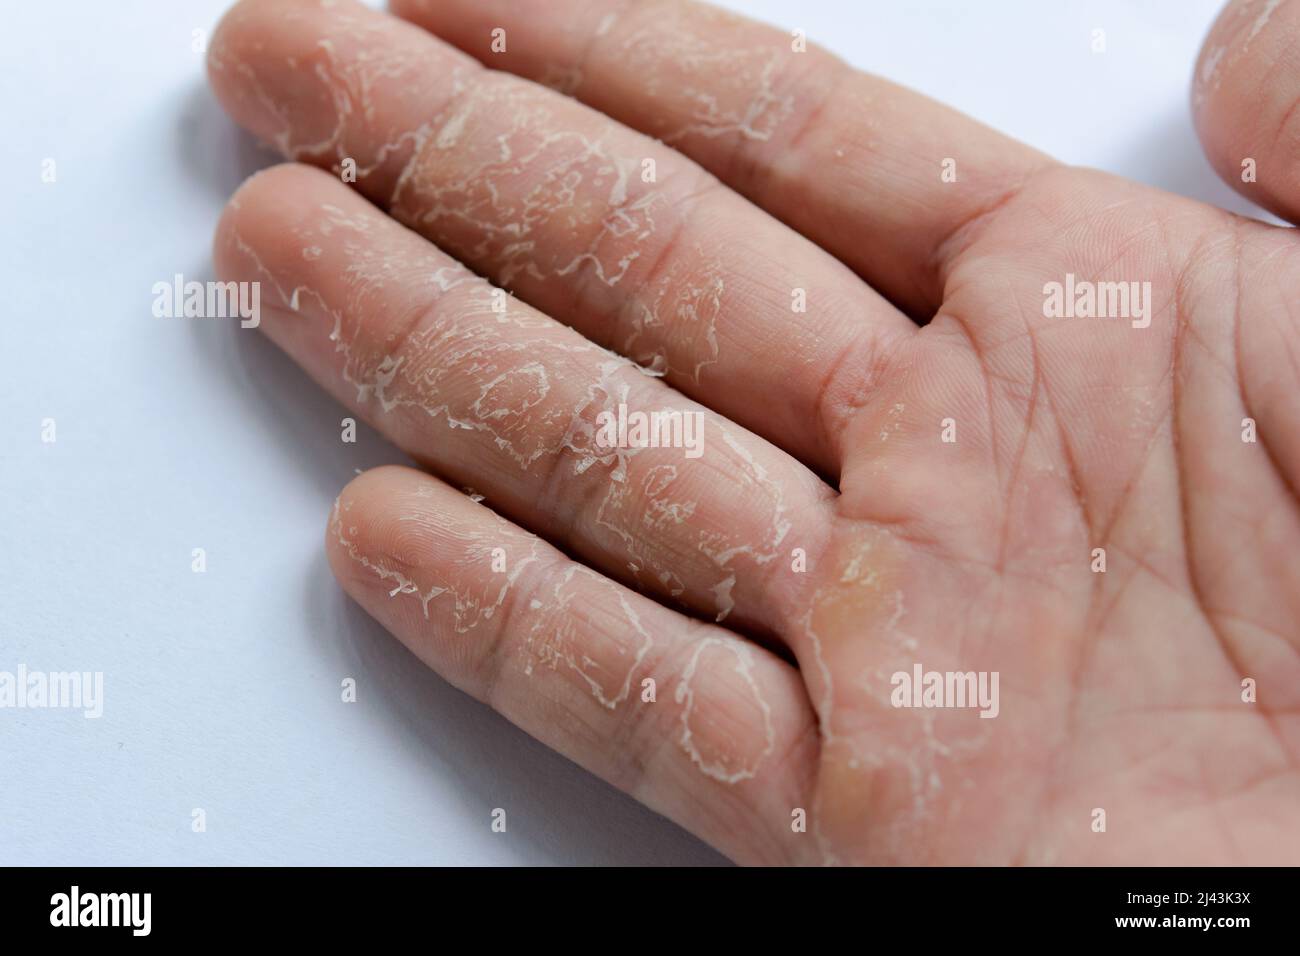 Why the Skin On Your Hands Is Peeling—and How to Stop It